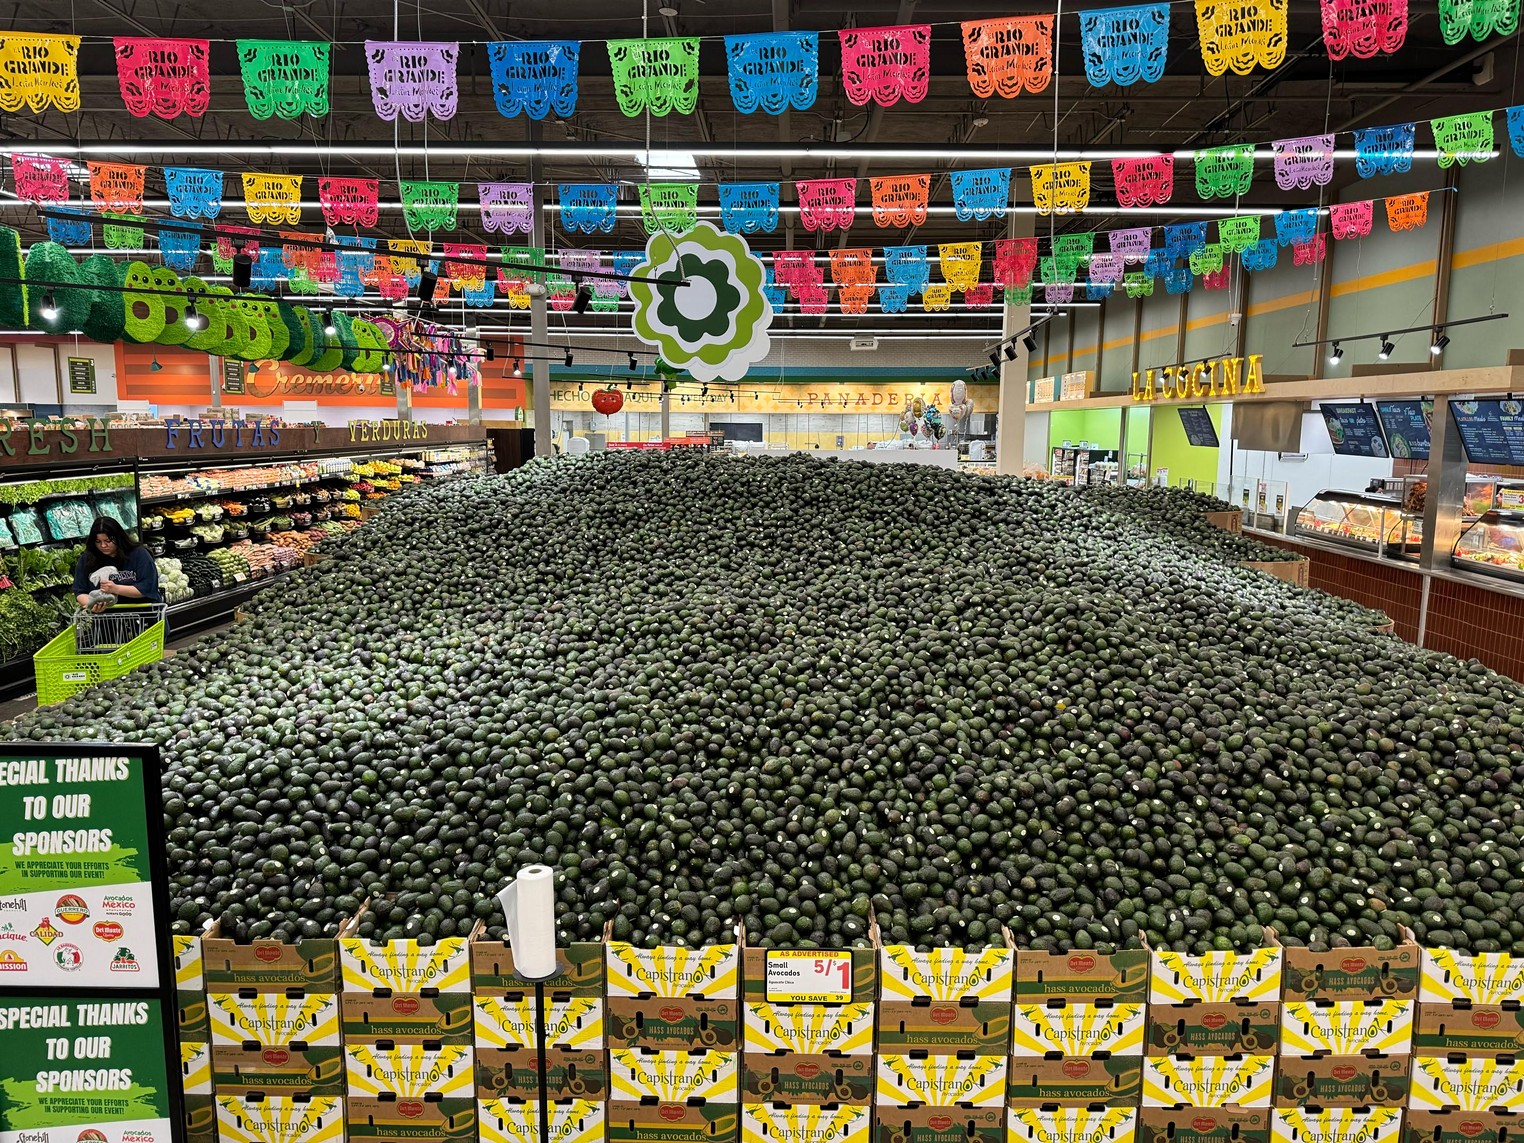 Dallas Market Attempts to Create World’s Largest Avocado Display